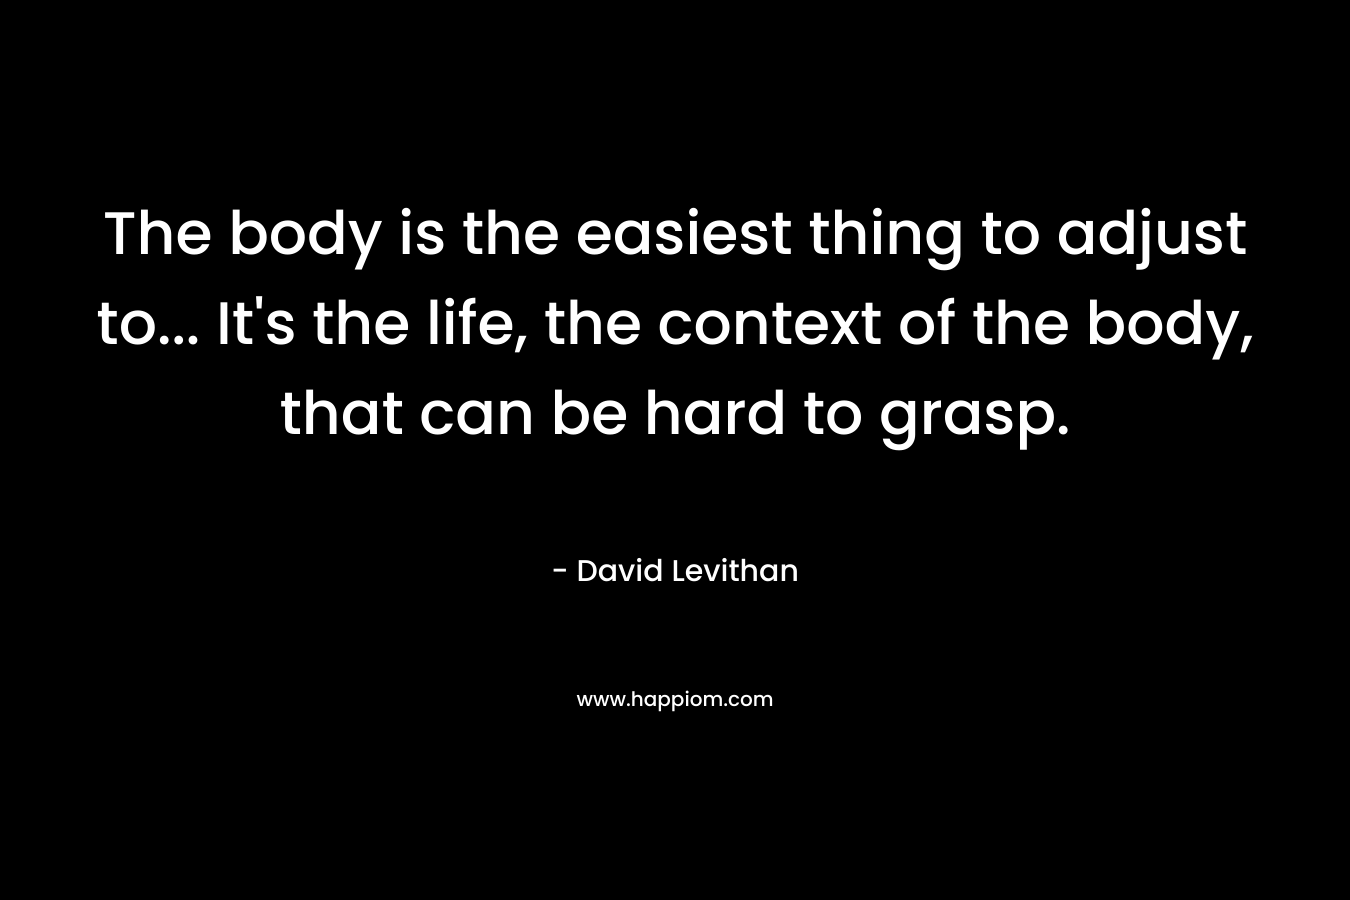 The body is the easiest thing to adjust to… It’s the life, the context of the body, that can be hard to grasp. – David Levithan